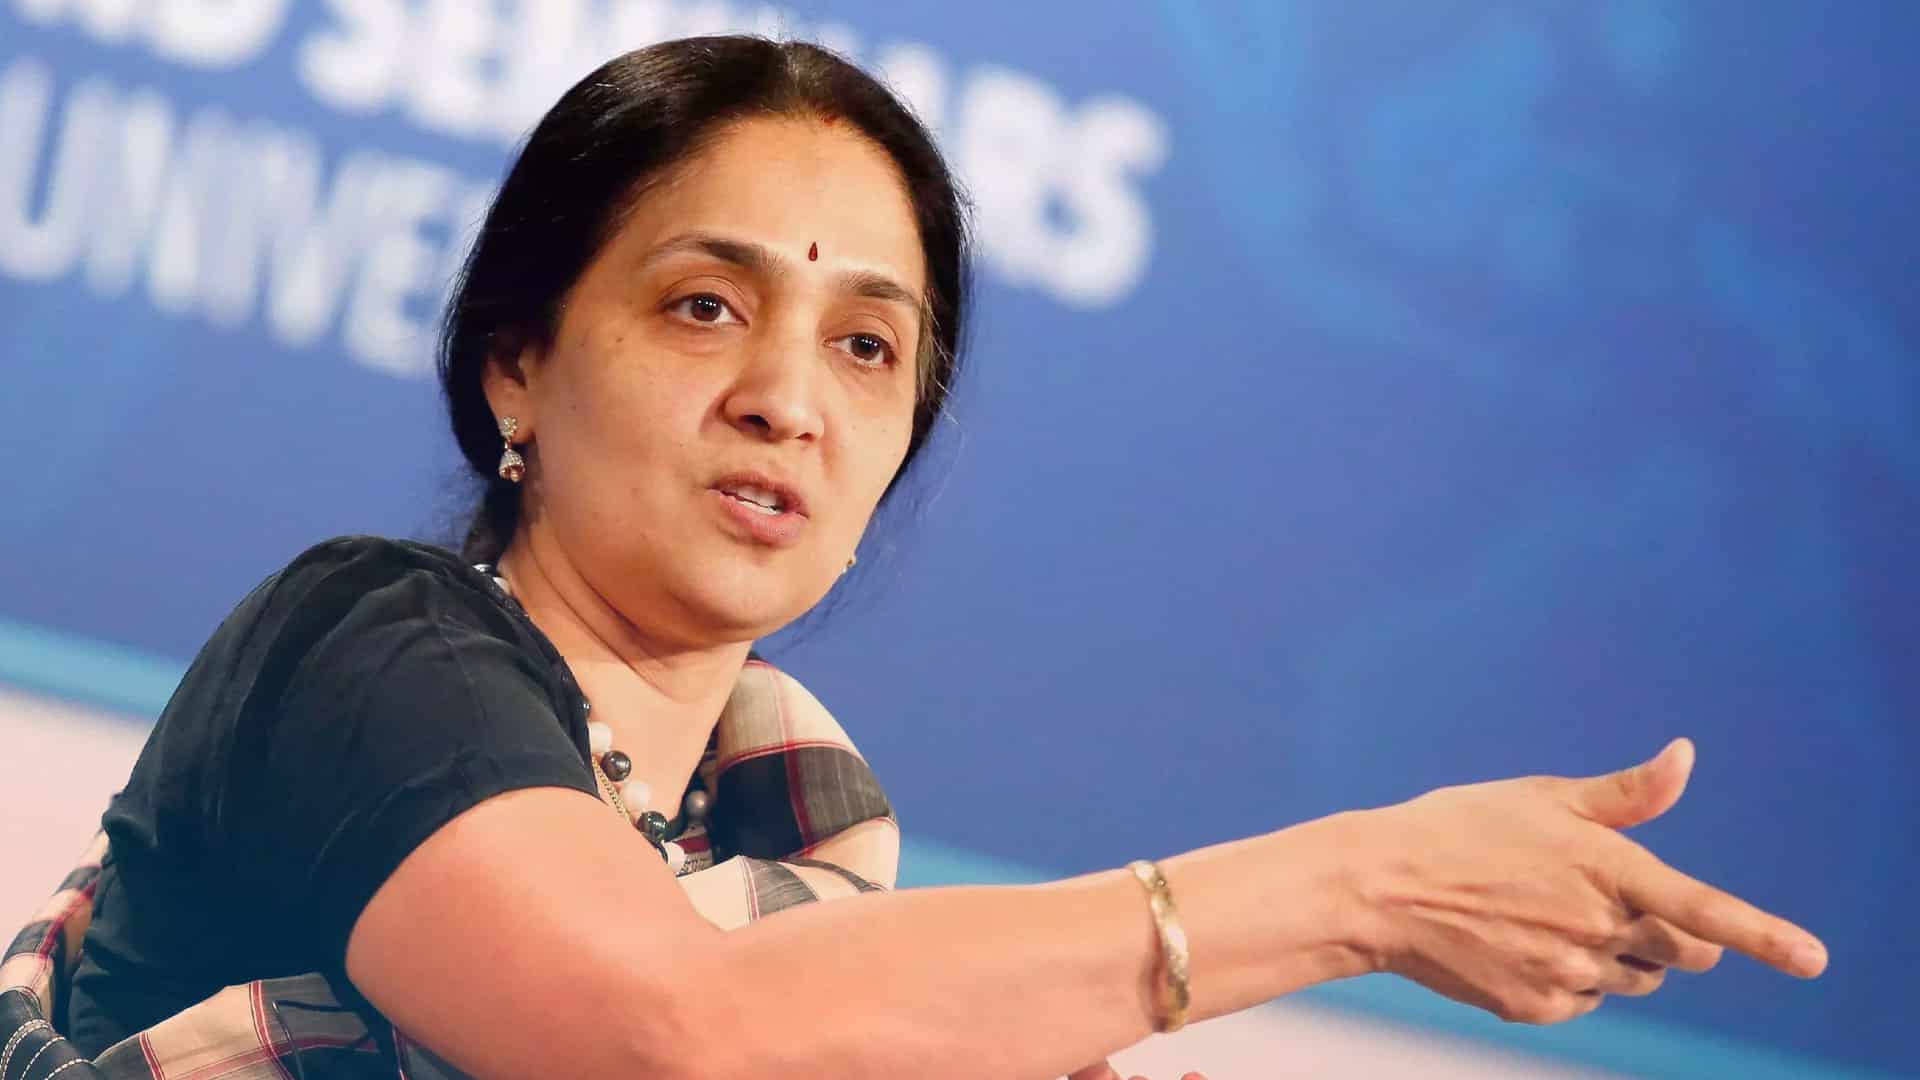 ED records statement of ex-NSE MD Chitra Ramkrishna in money laundering case